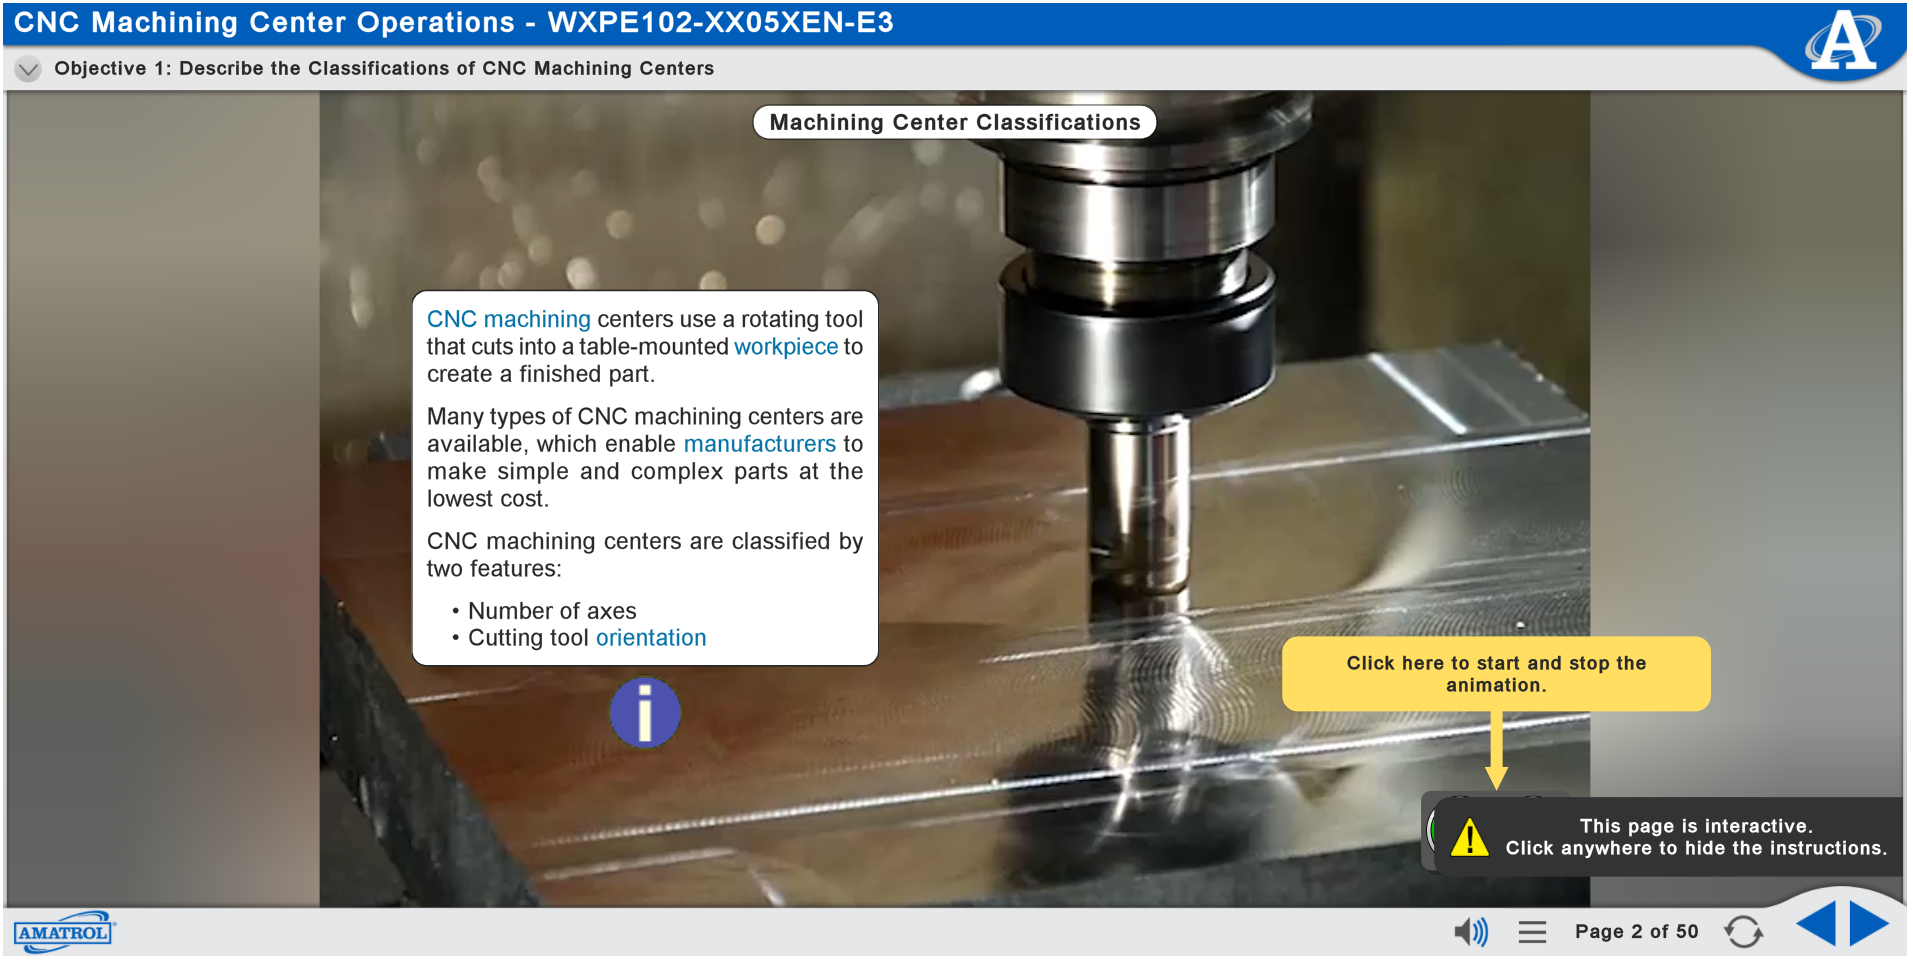 Machining Center Classifications eLearning